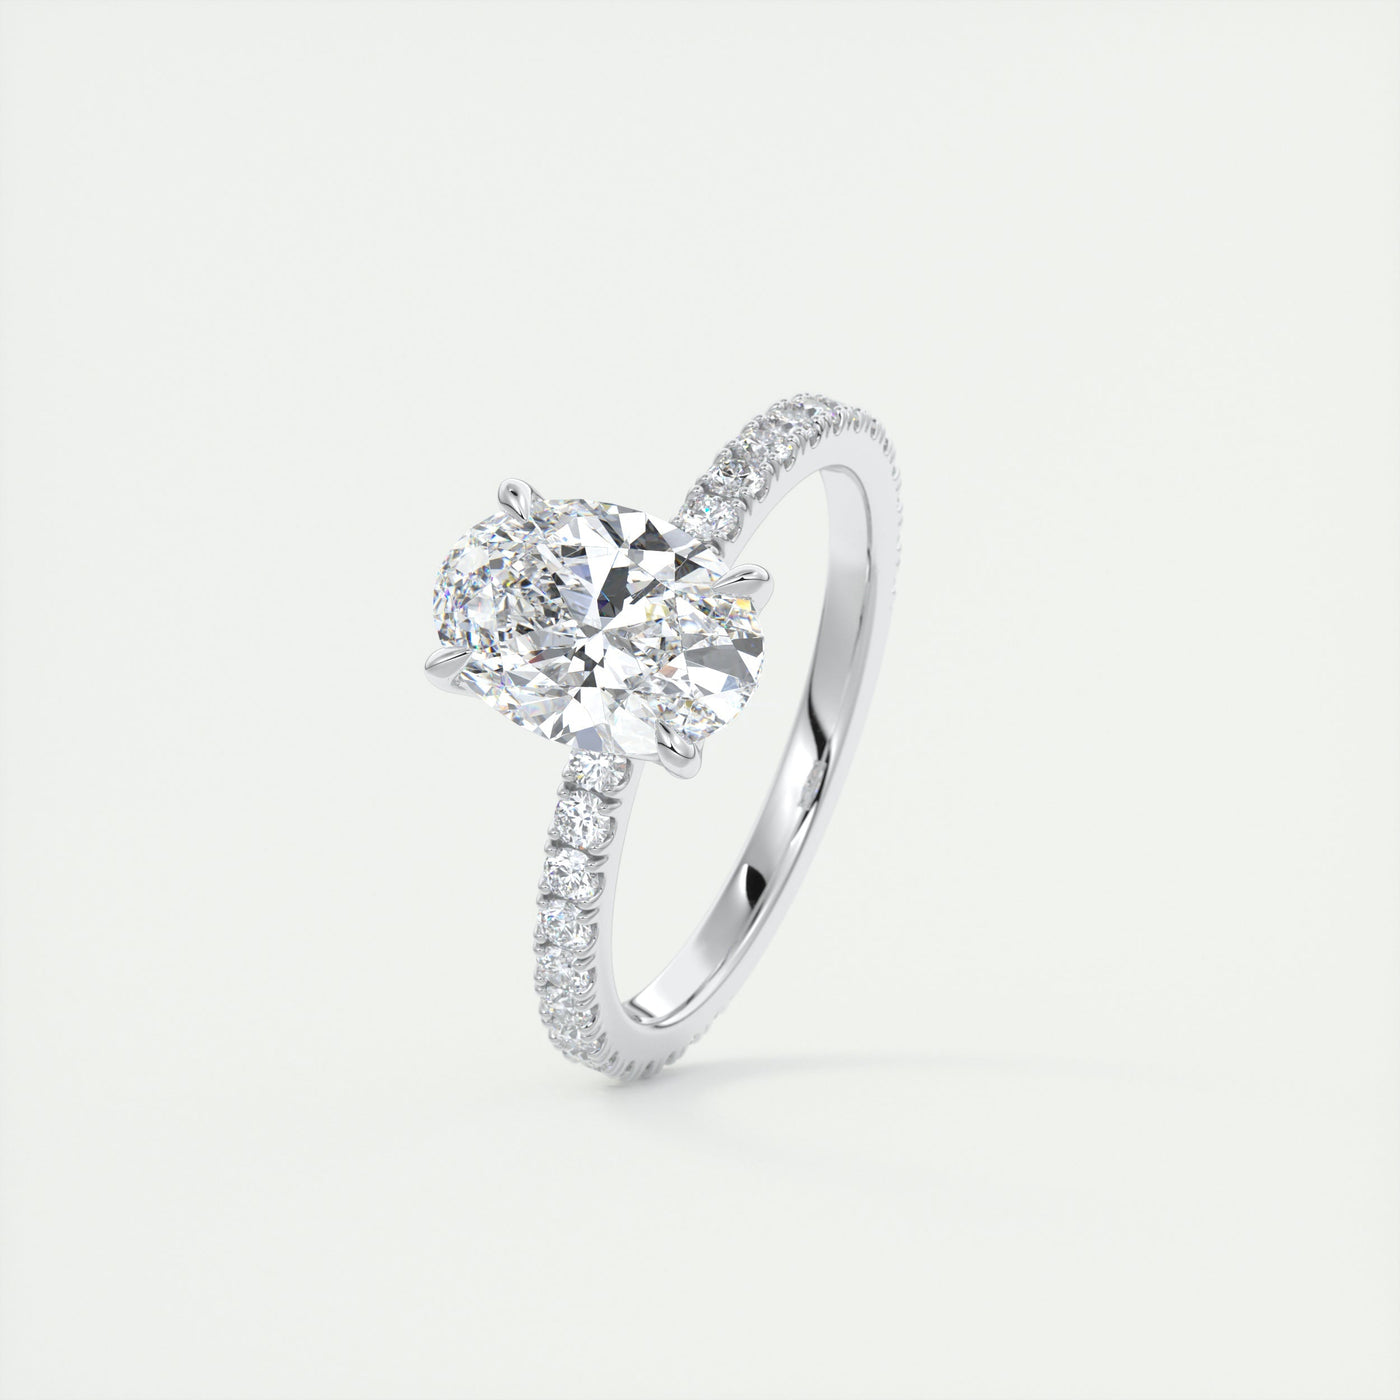 2CT Oval Cut Moissanite Engagement Ring with Pave Setting